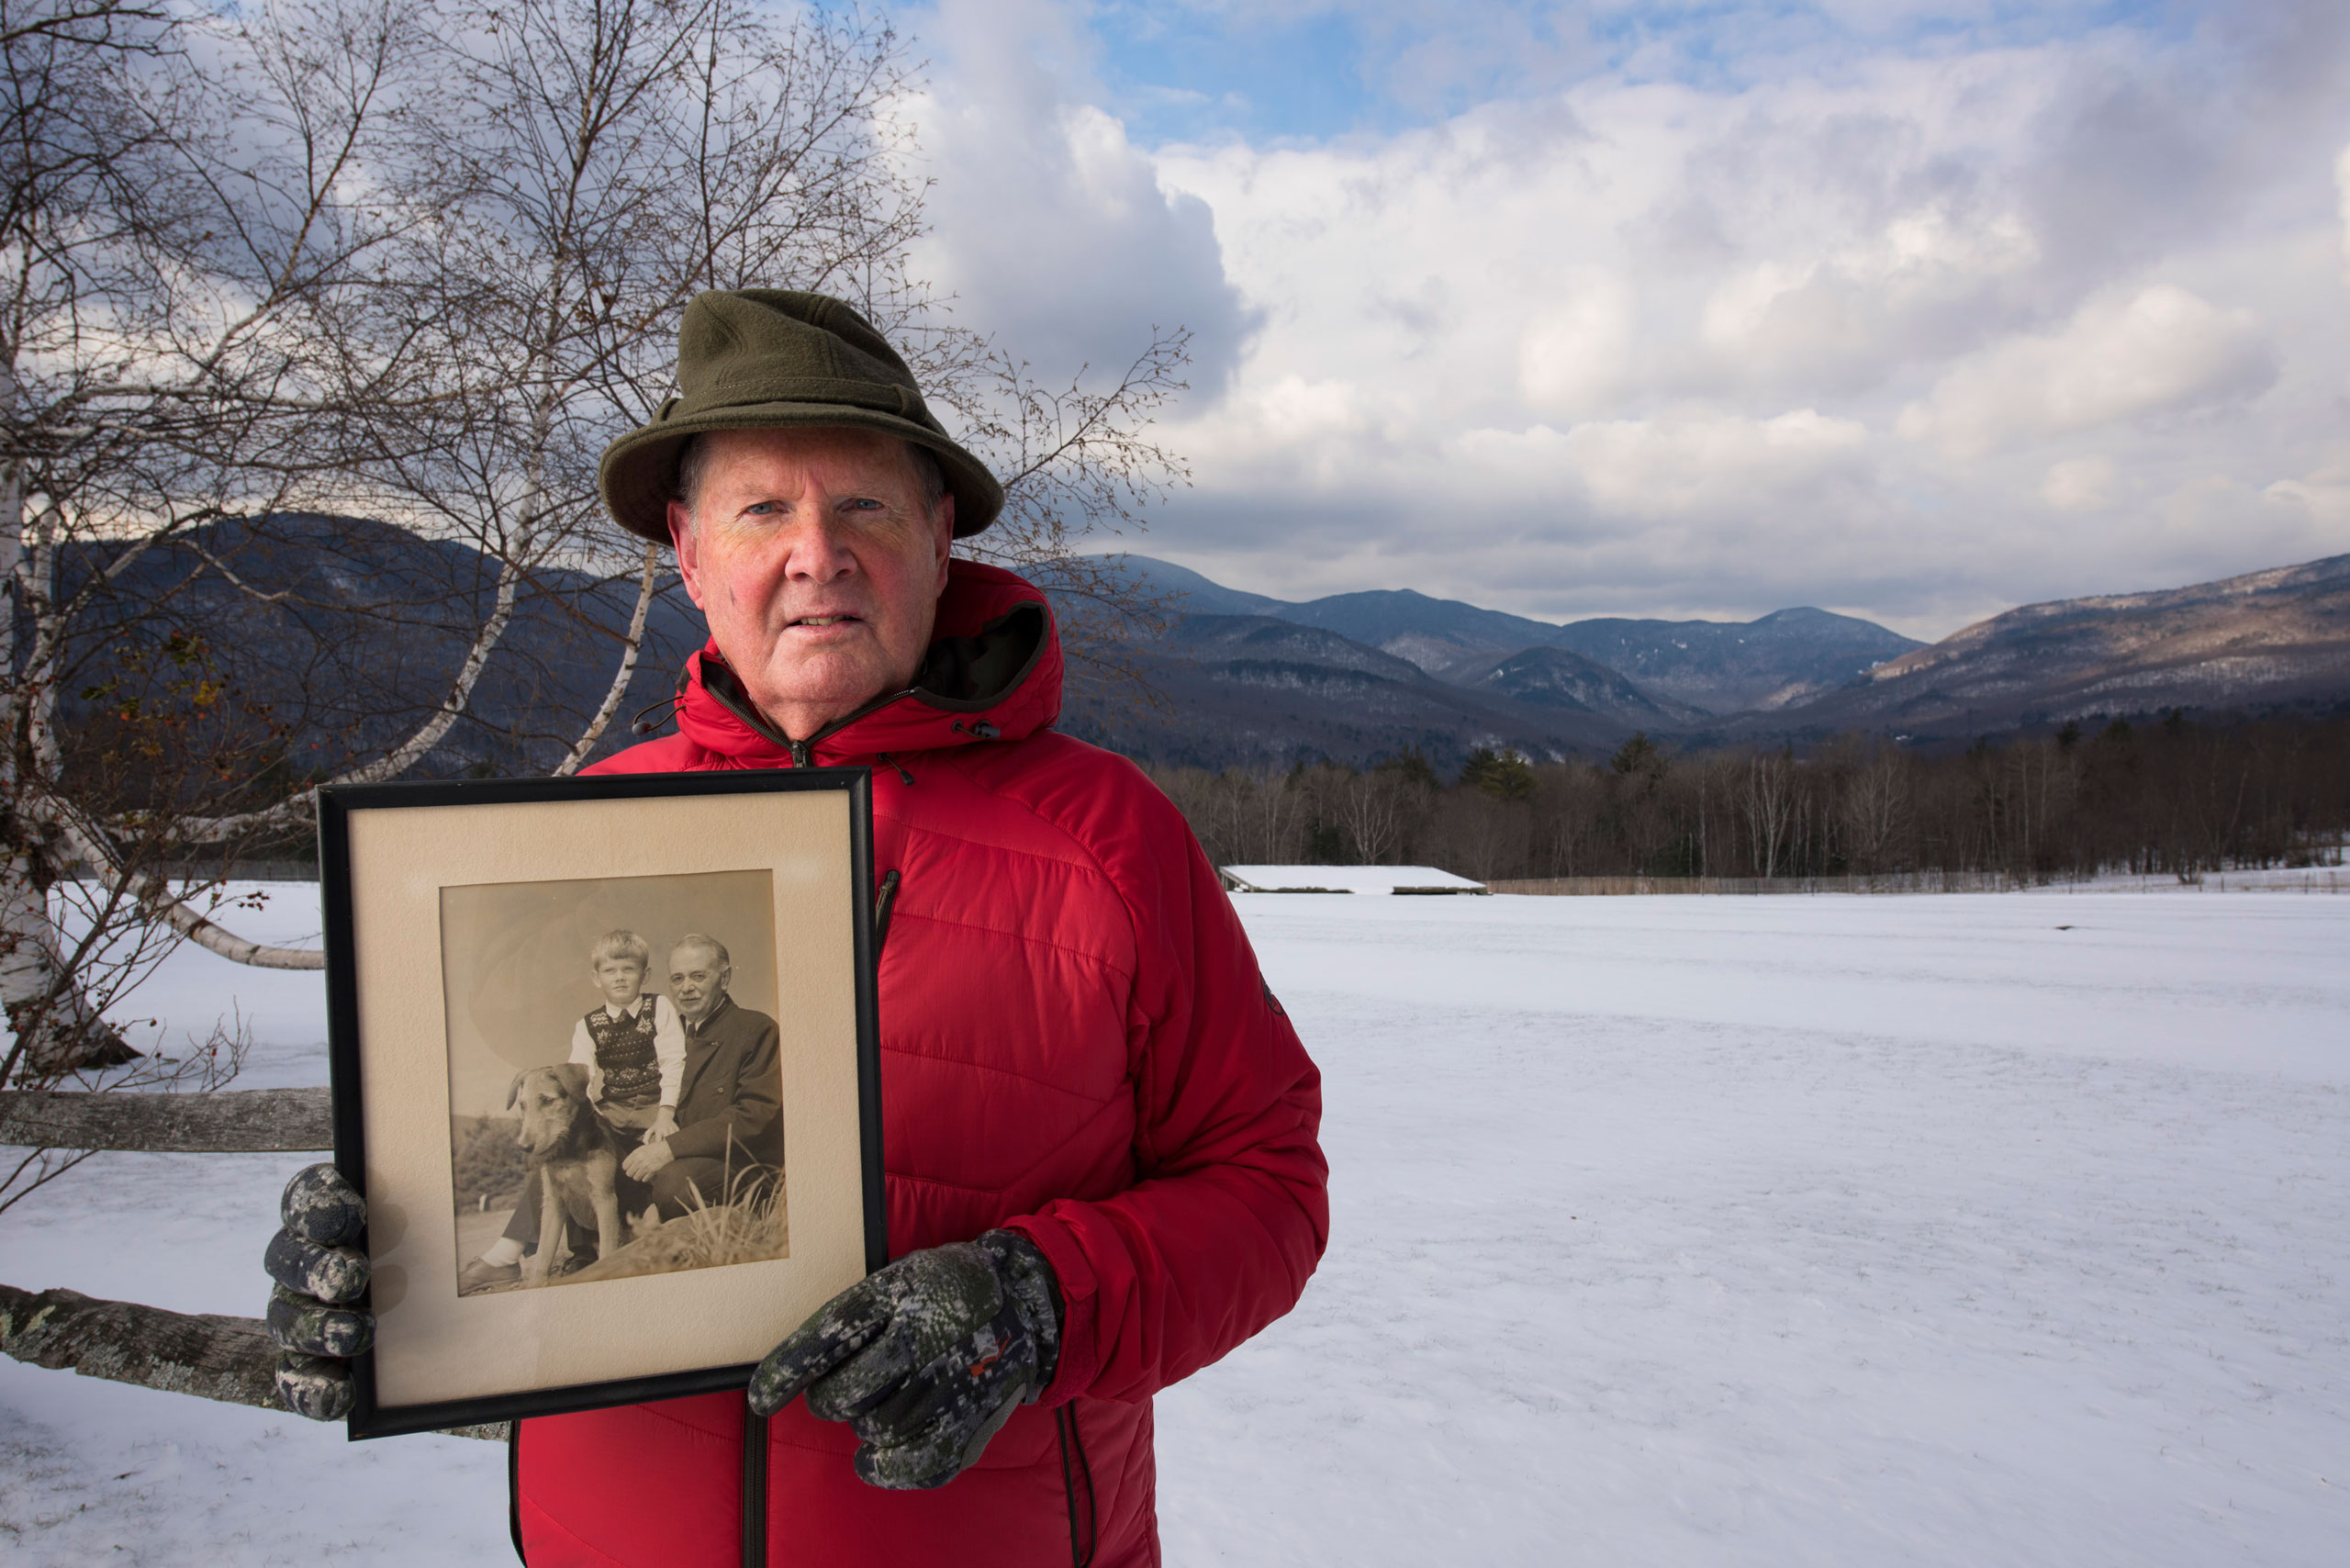 Portrait of Johannes von Trapp at the Trapp Family Lodge, alongside a field where music is performed in warmer weather. He is holding a portrait of his father and himself. (Joe McNally for LIFE)